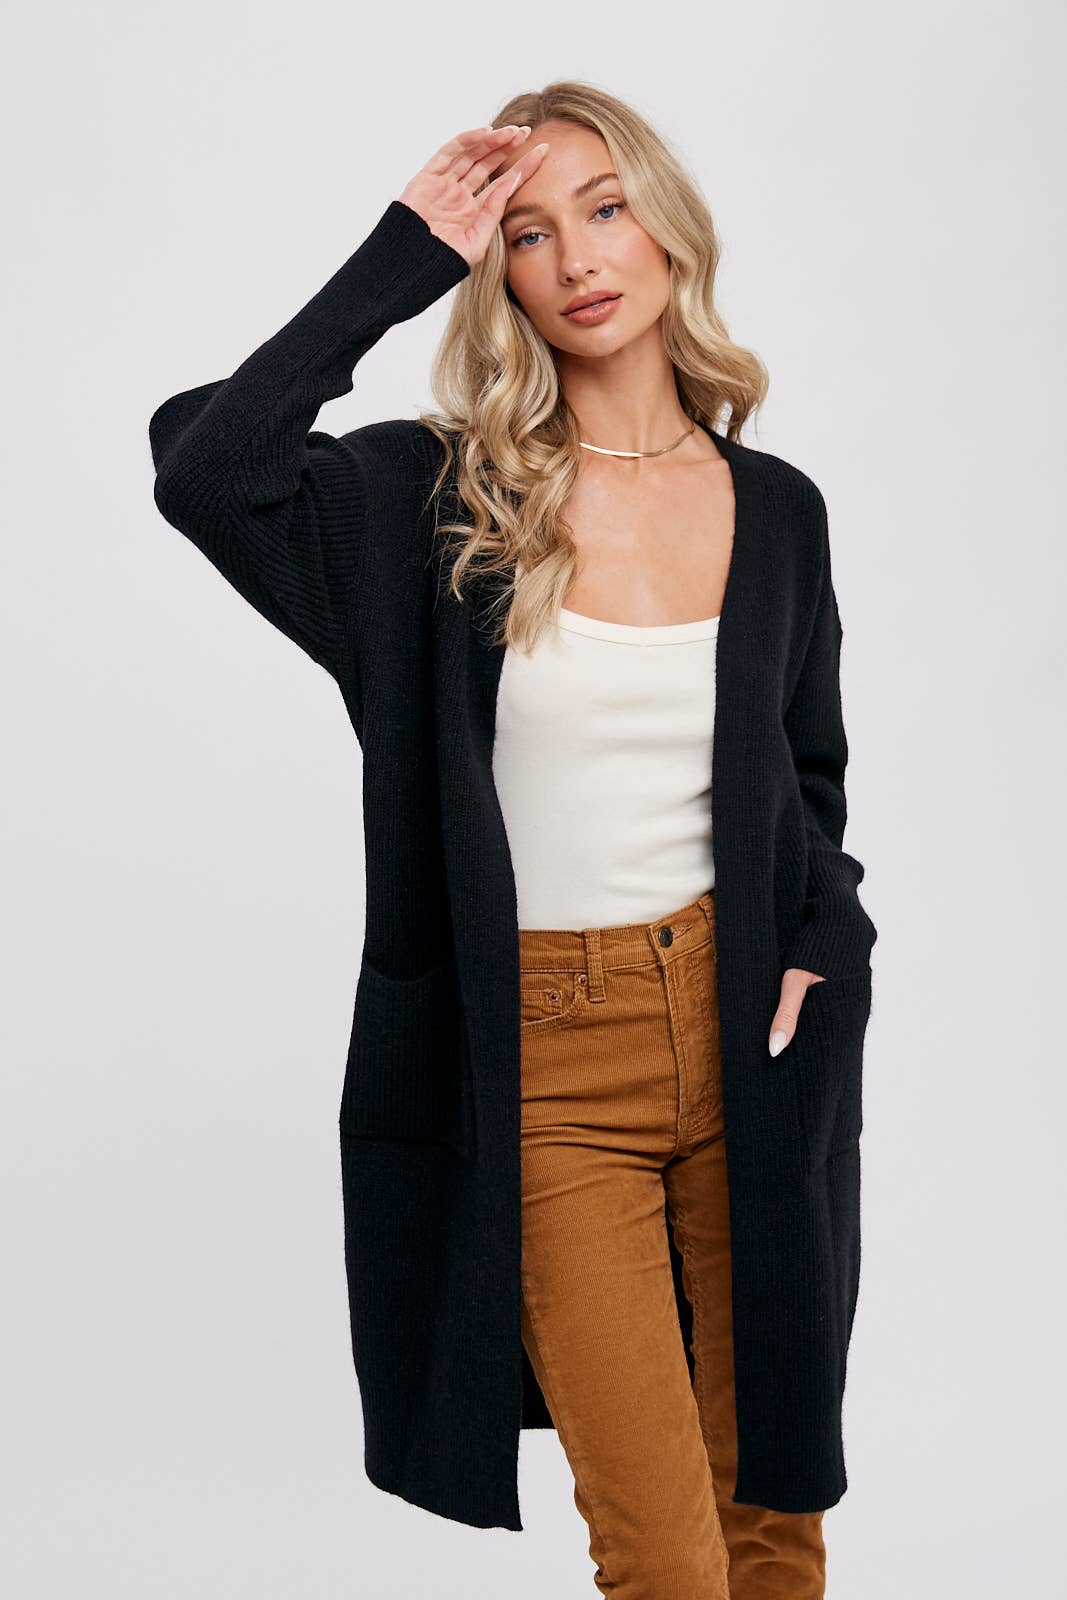 Robin - RIBBED OPEN FRONT CARDIGAN